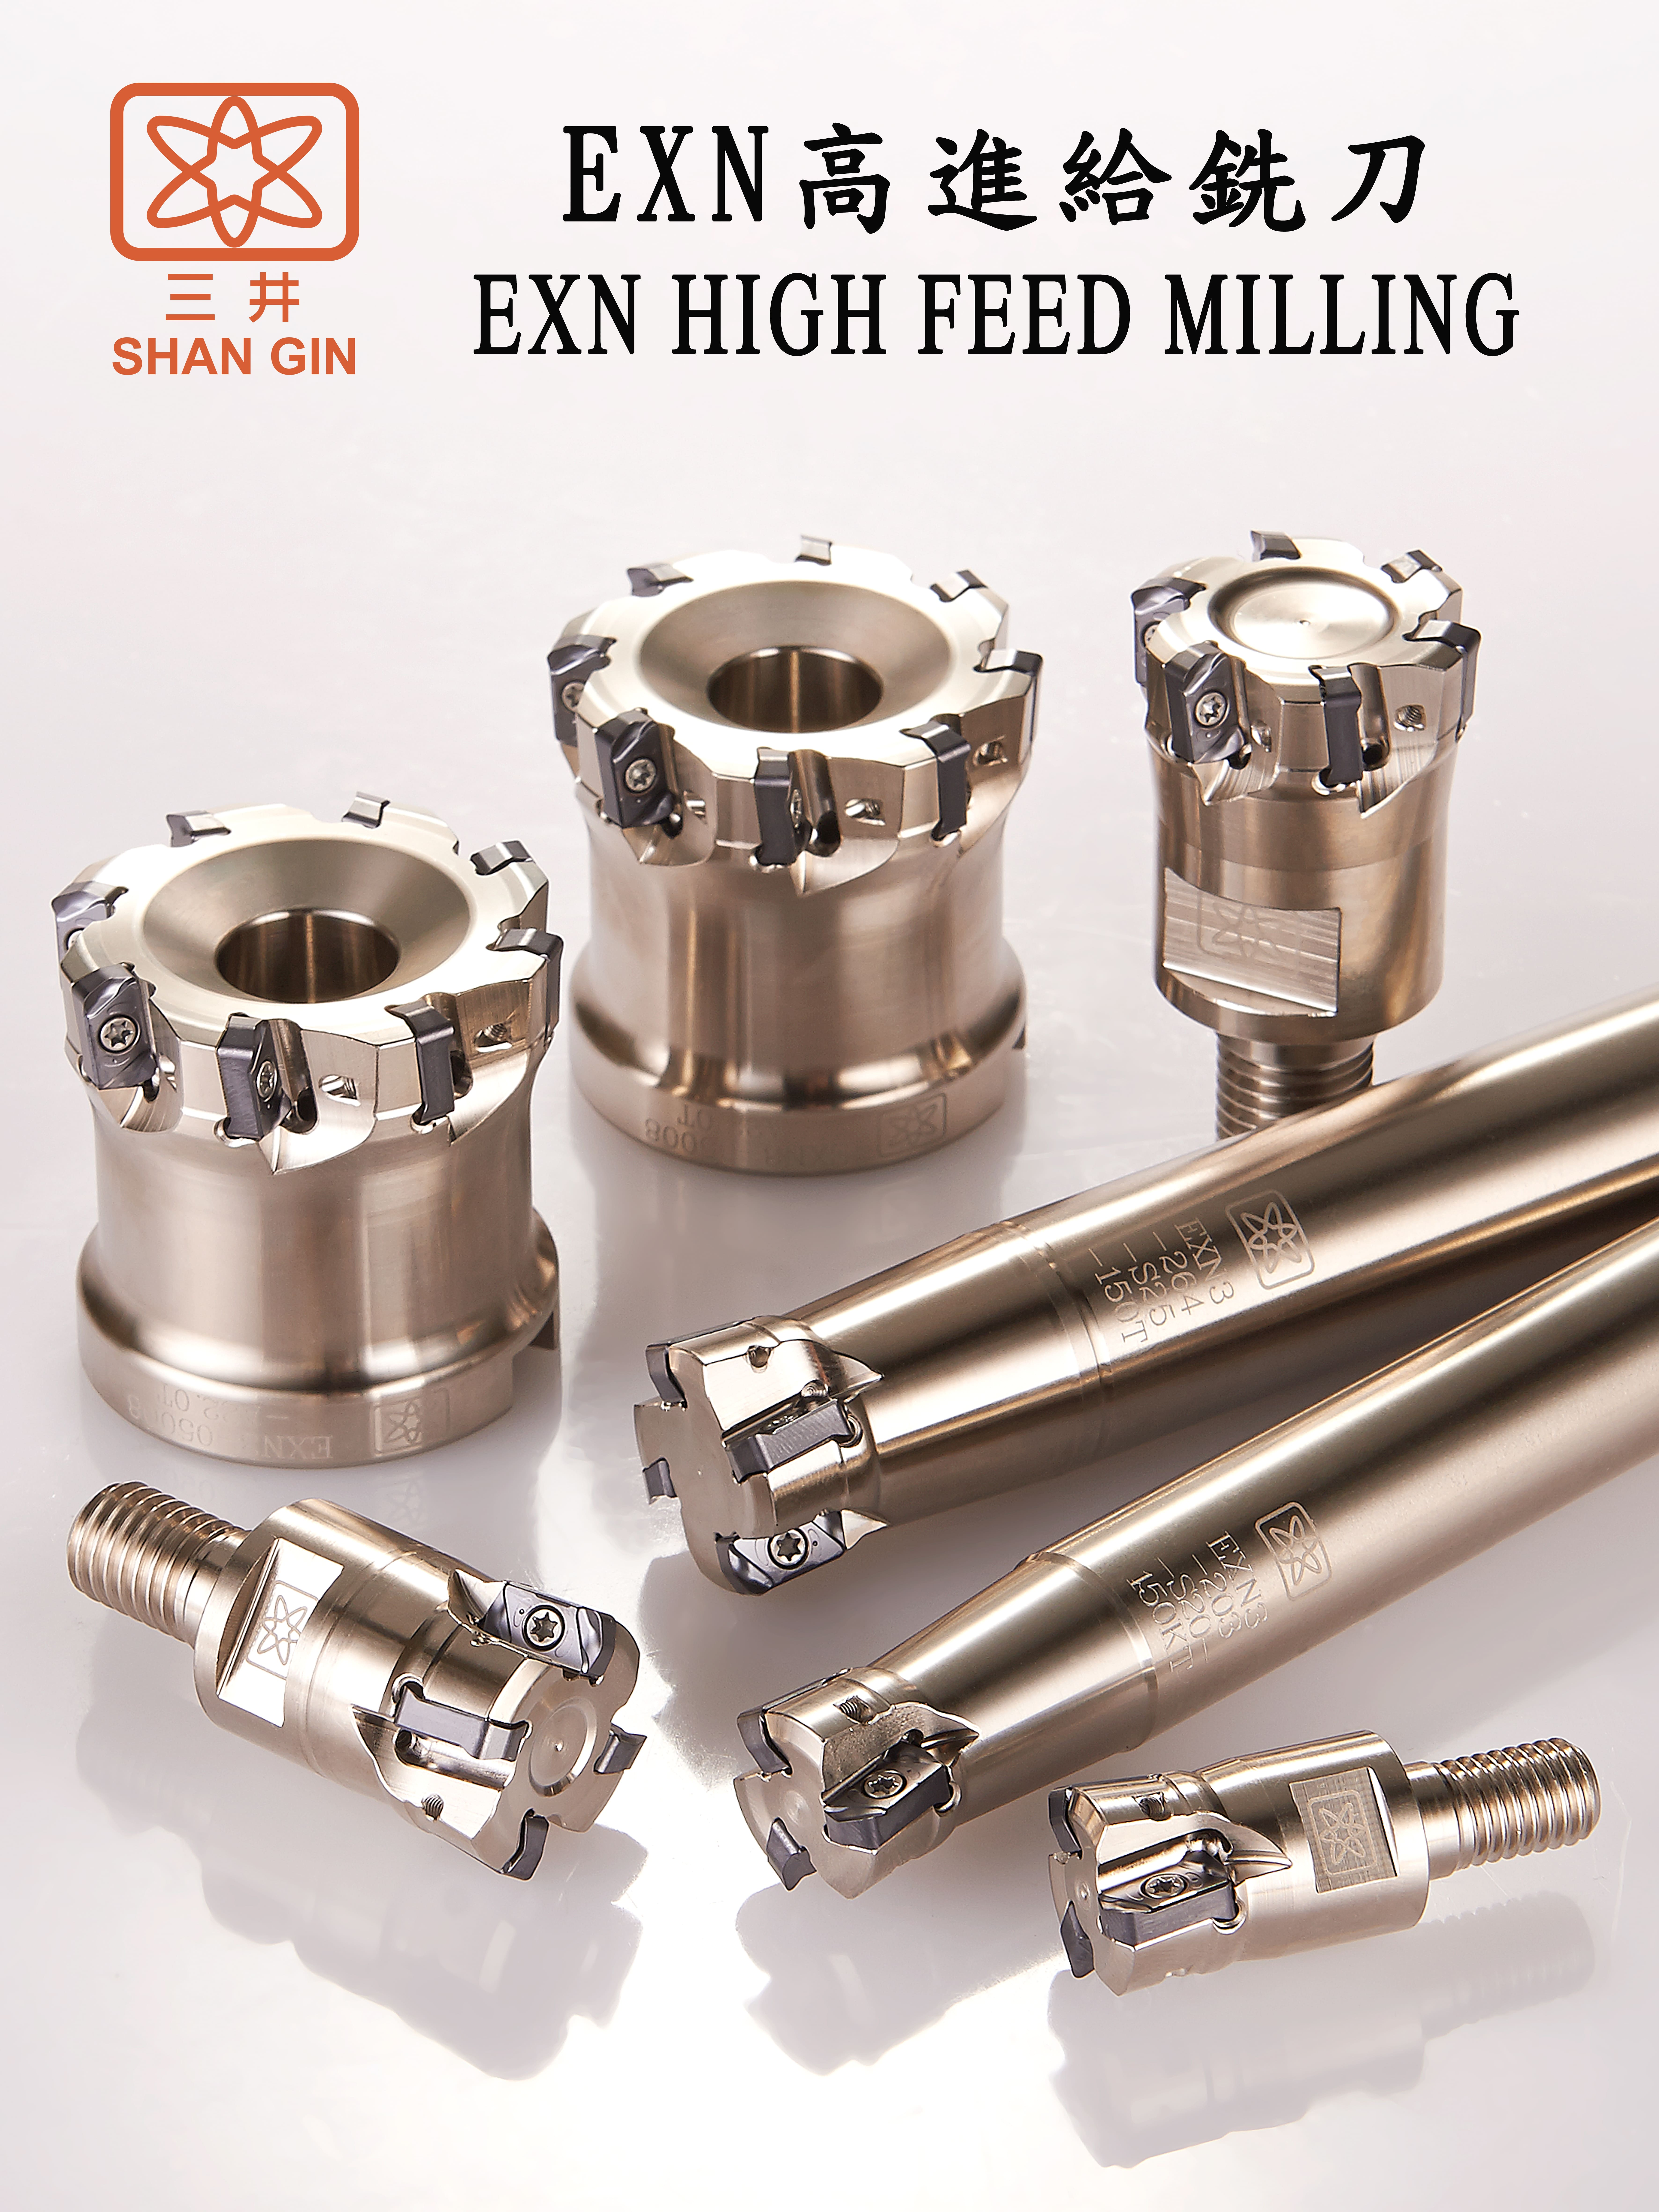 Products|EXN HIGH FEED MILLING